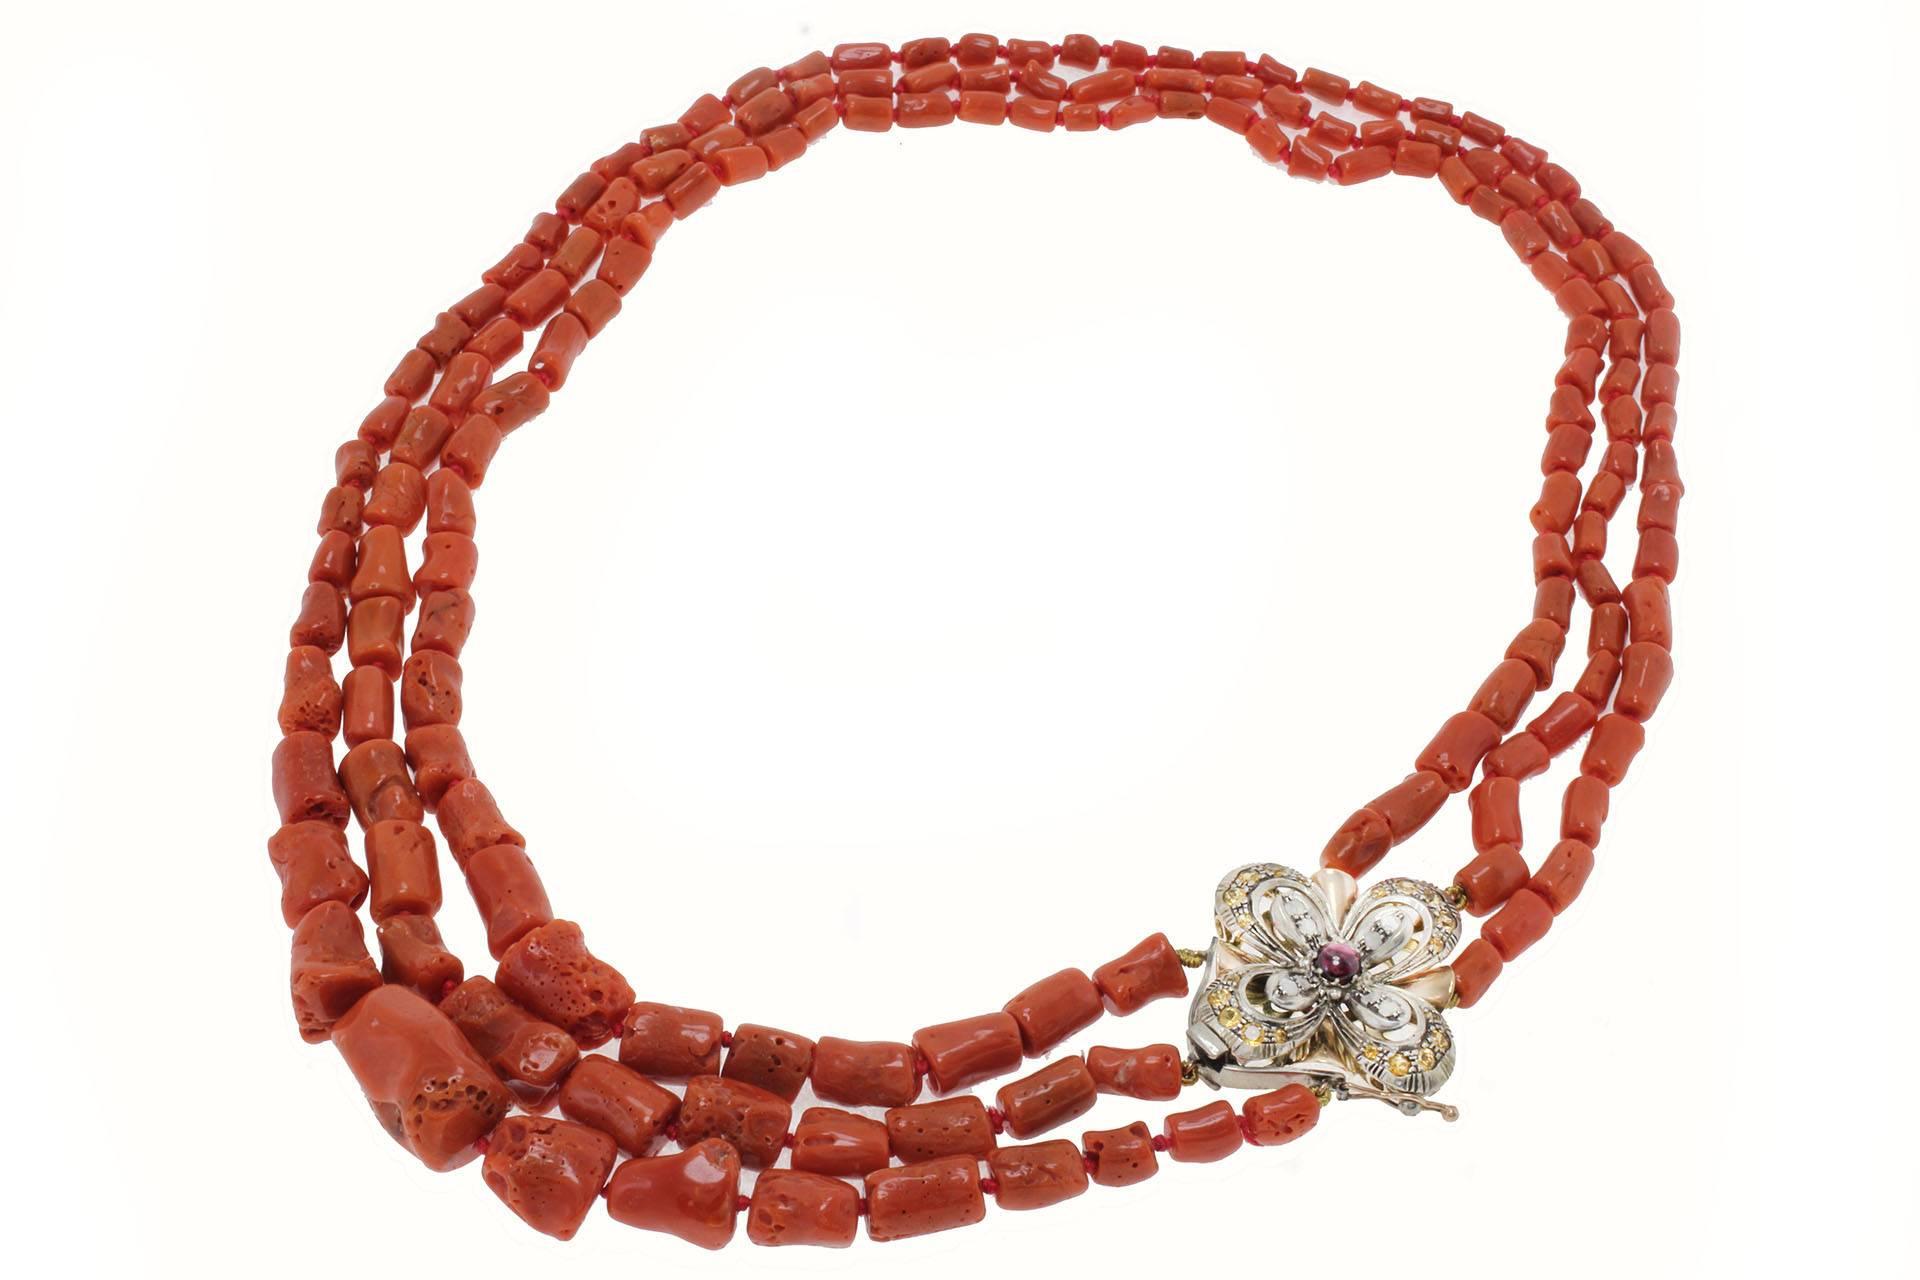 Coral necklace composed of 3 coral rows and one gold and silver flower haped clasp mounted with diamonds, topaz and garnet.

Coral (129.00 gr) 
diamonds (0.52 kt) 
topaz and garnet (3.14 kt)
tot.weight 145.90
r.f  ufoi